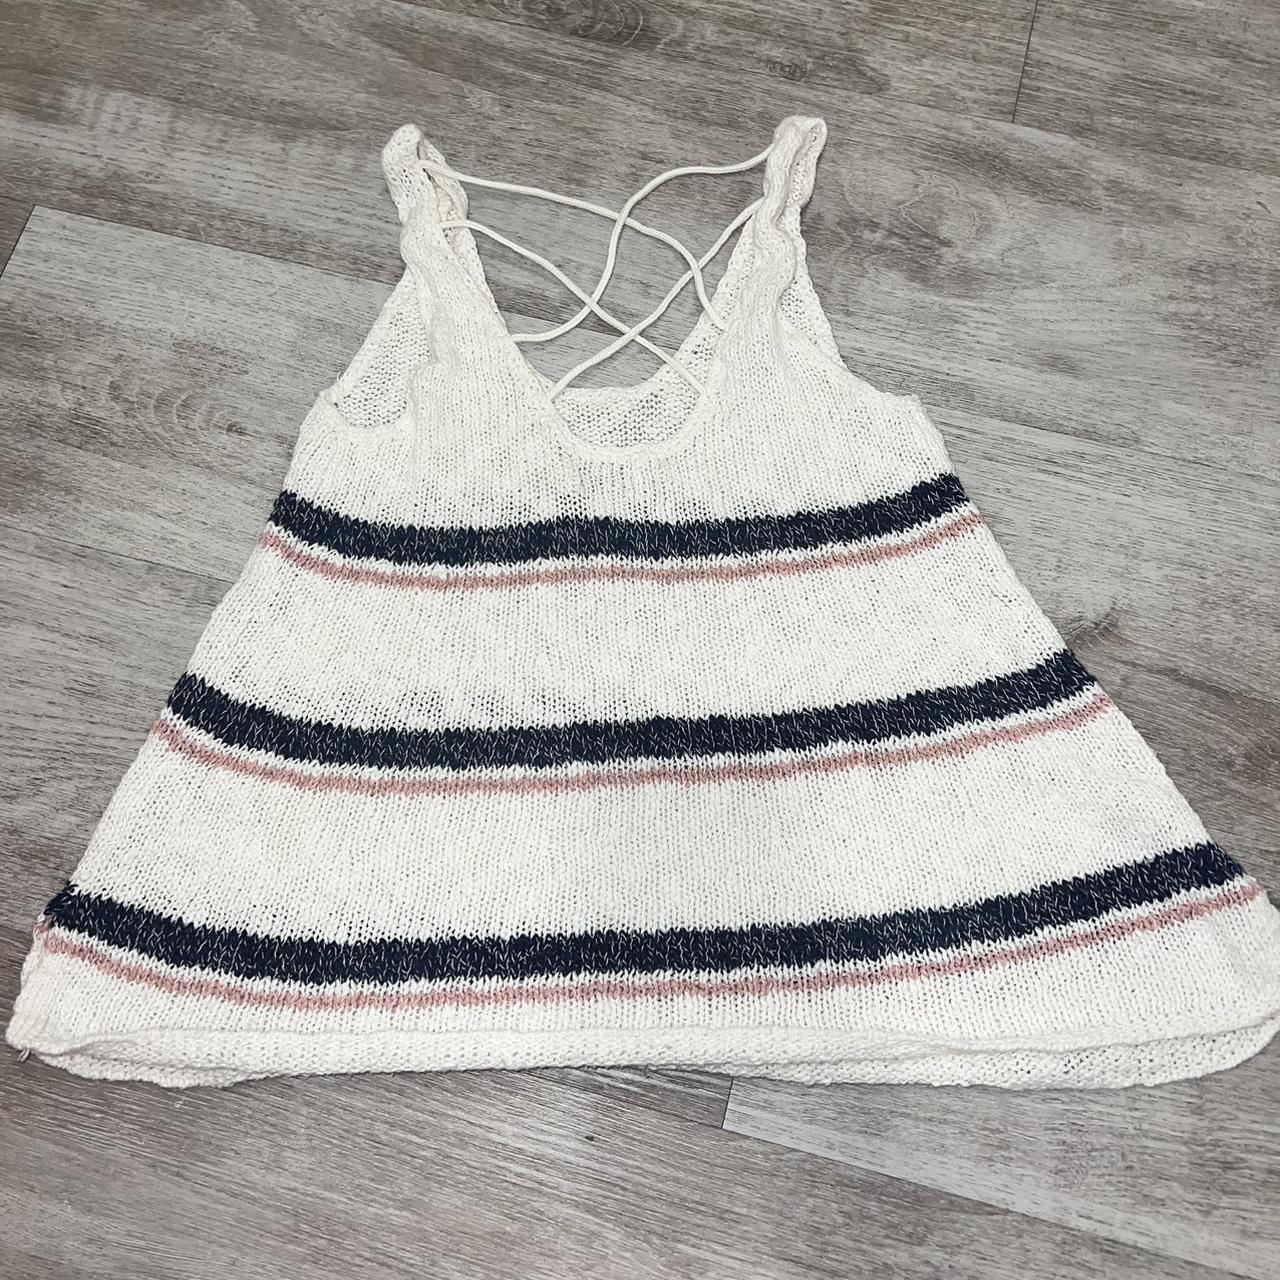 Aerie Crochet Halter Striped Crop Top Size Small